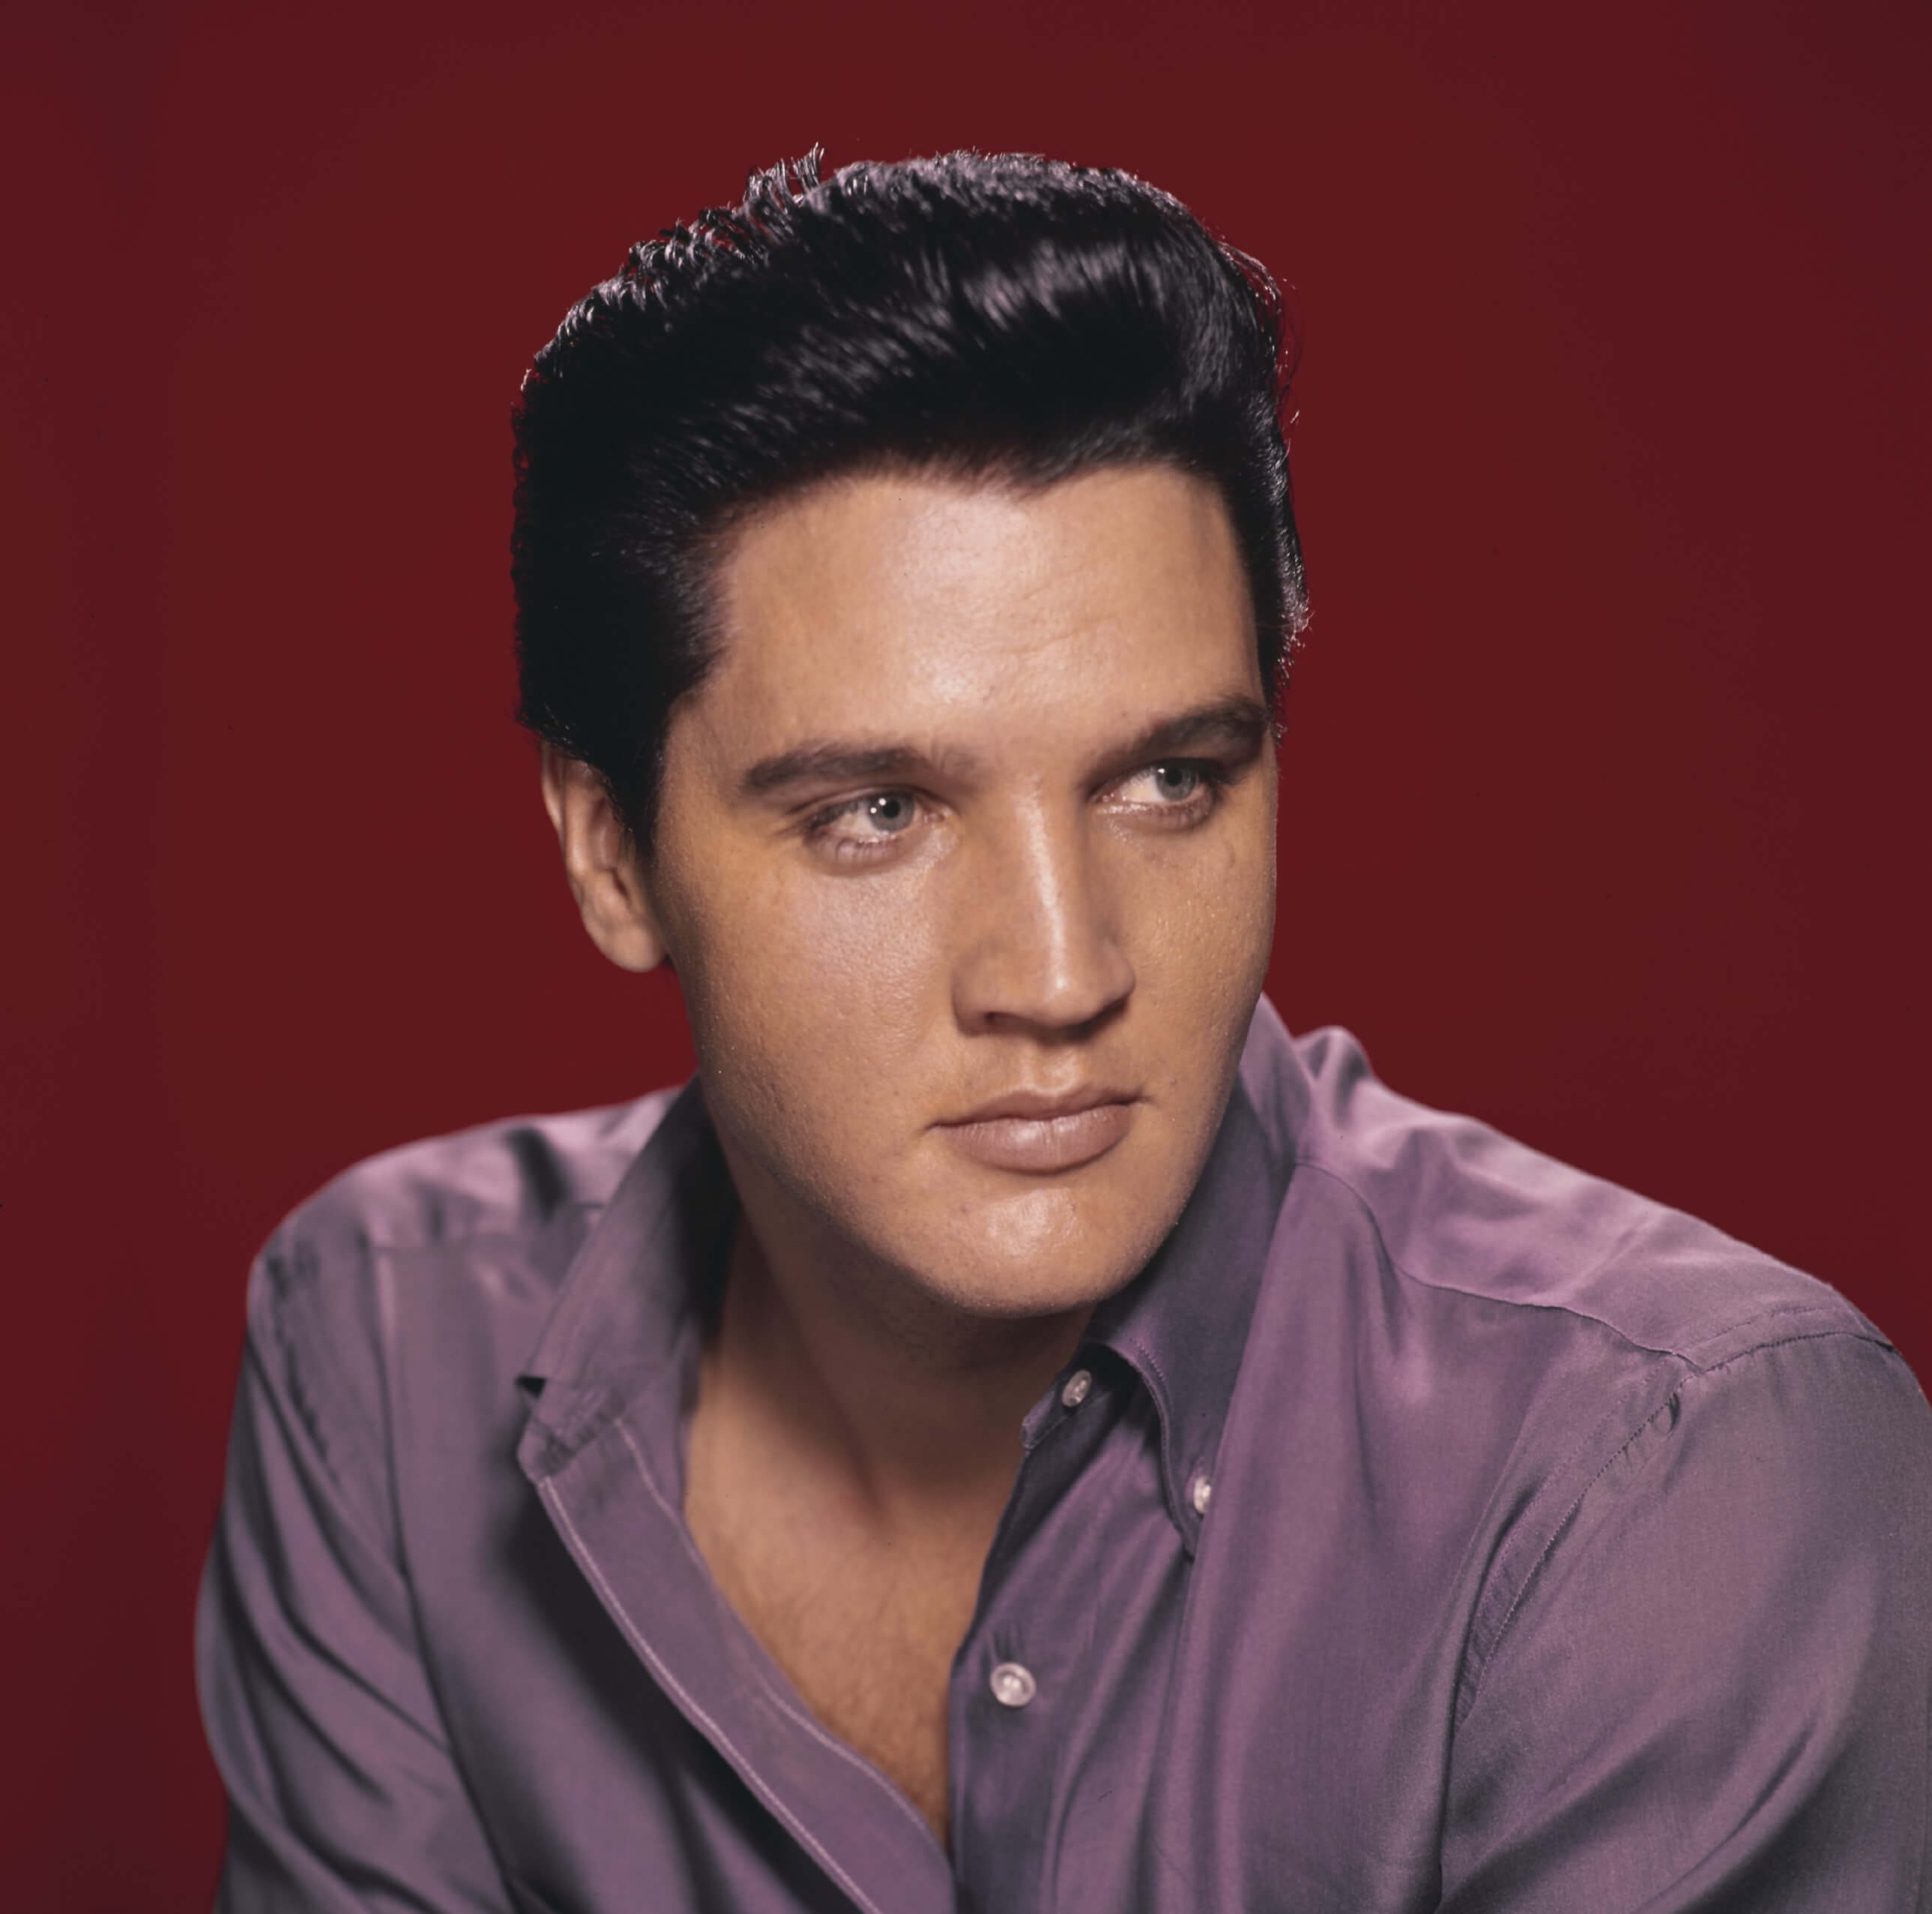 "Solitaire" singer Elvis Presley with a red background